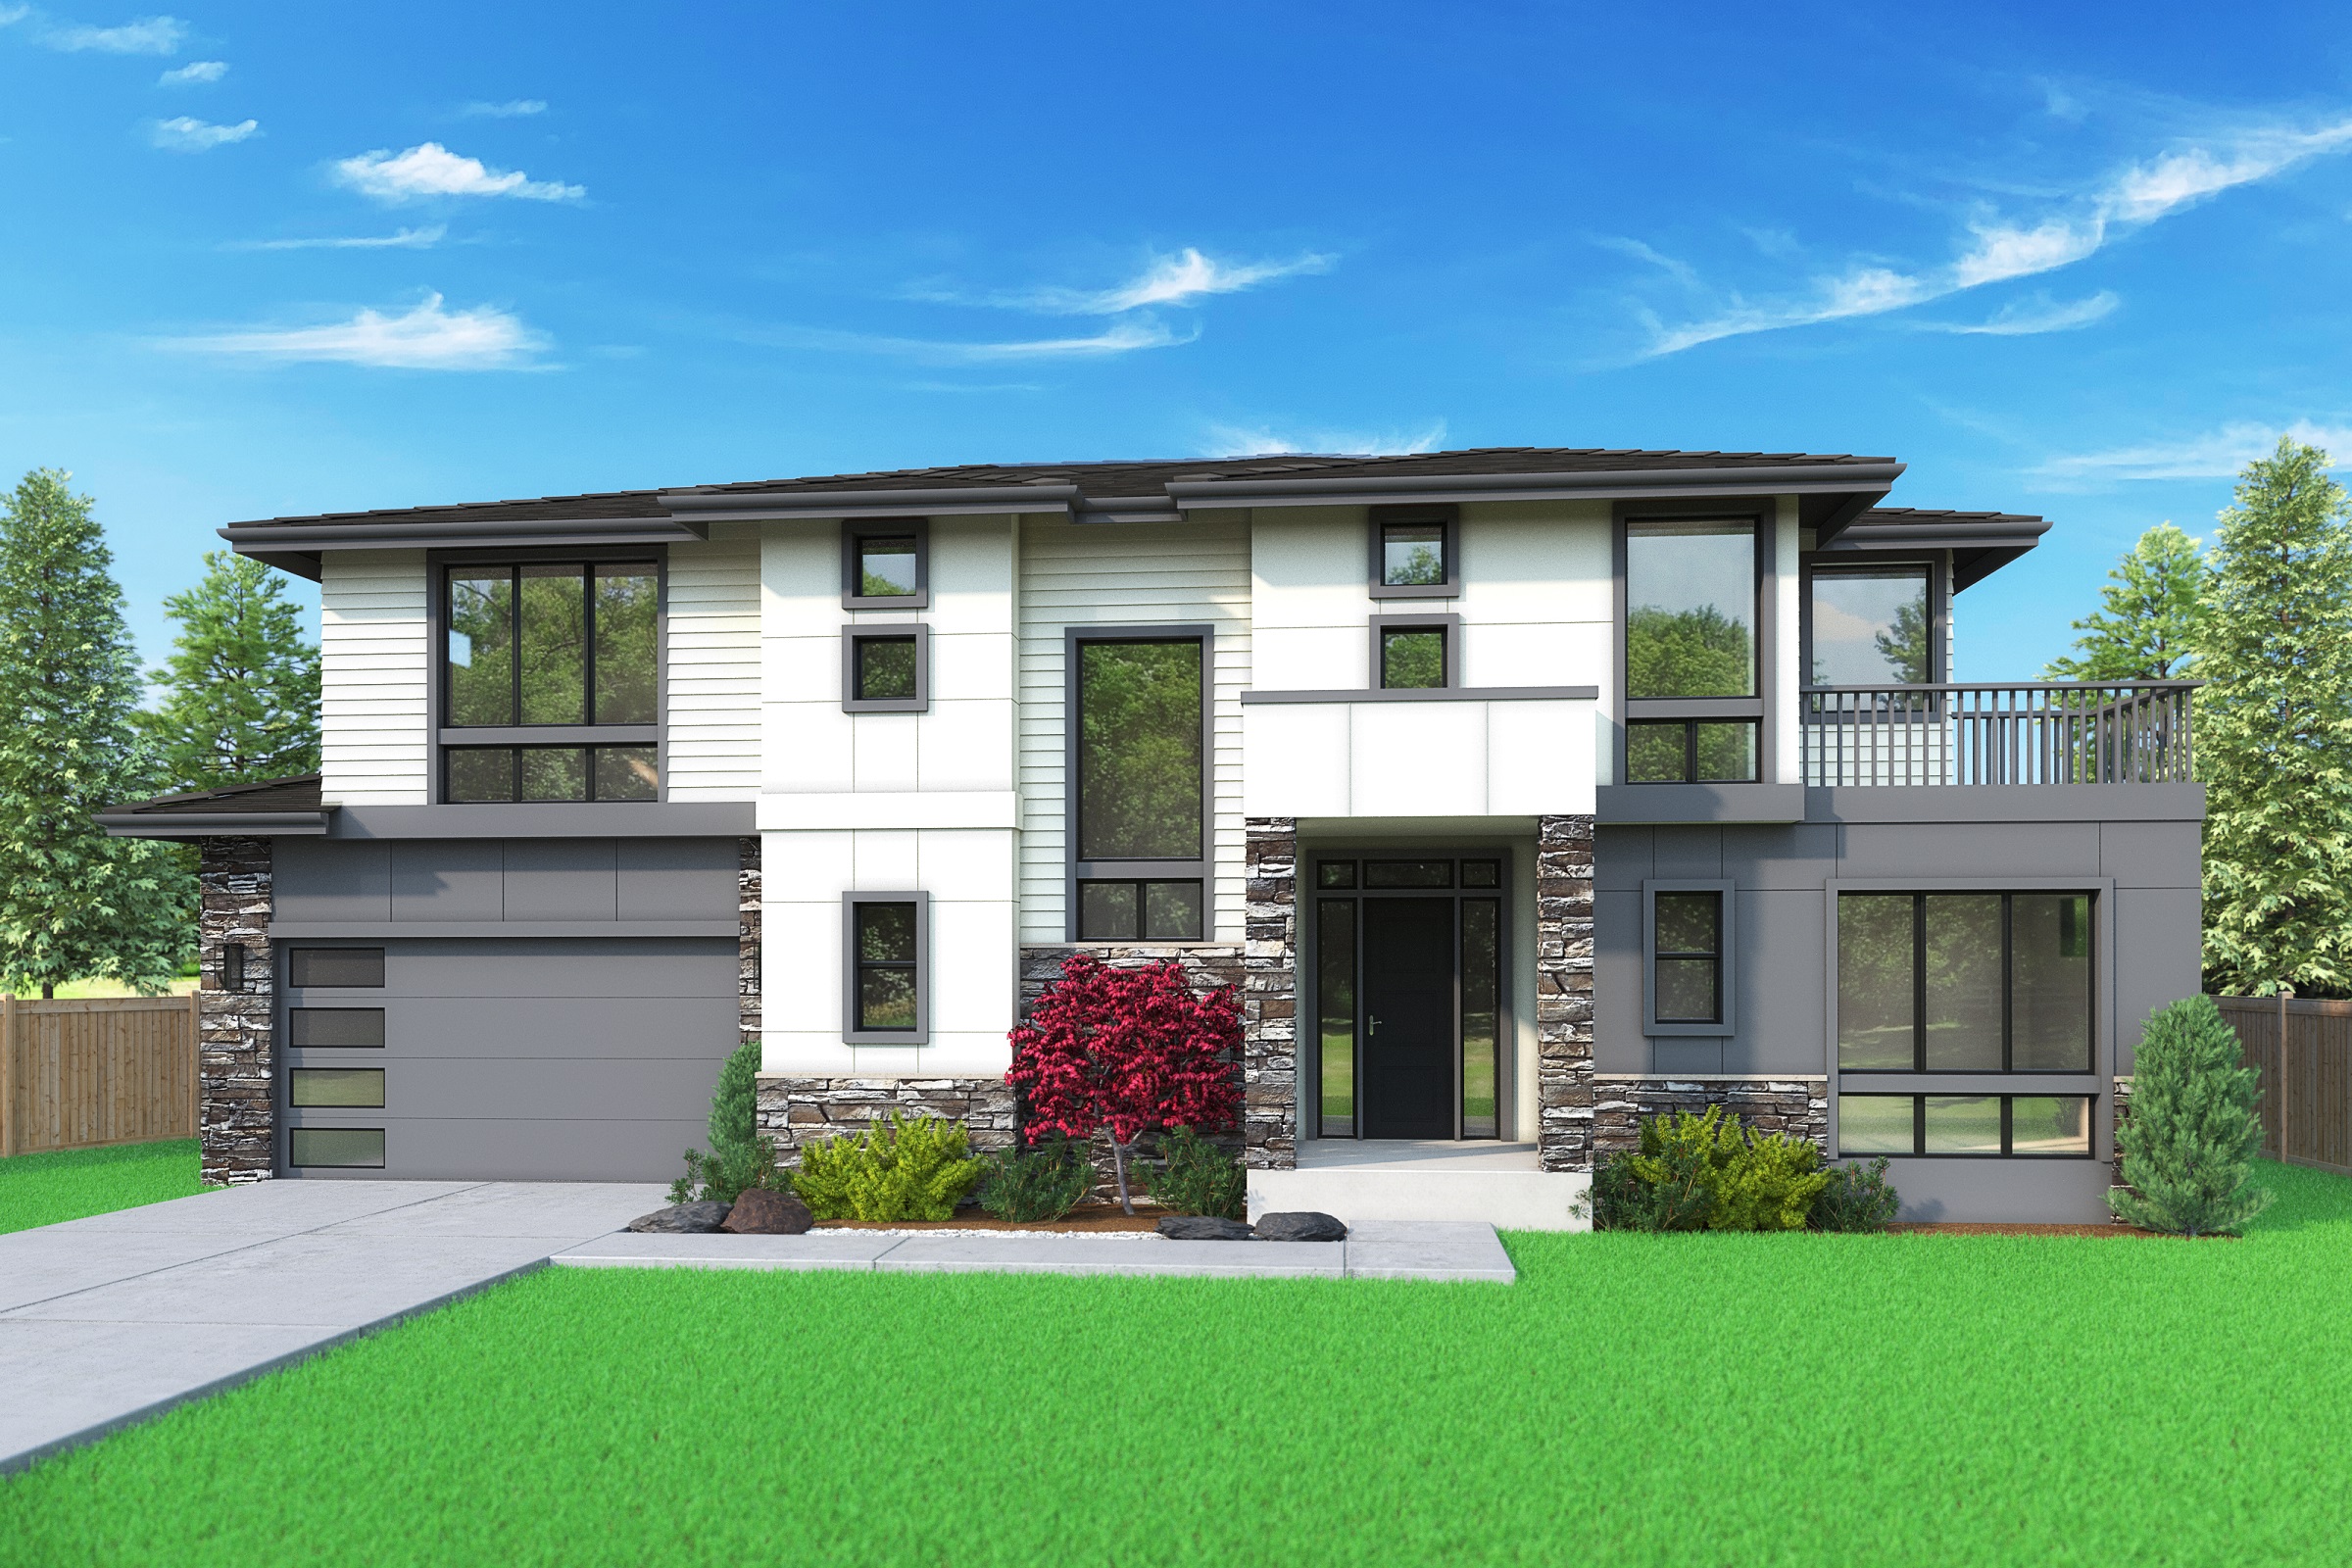 View our new luxury home construction on 16612 SE 26th St, in Bellevue, WA from MN Custom Homes